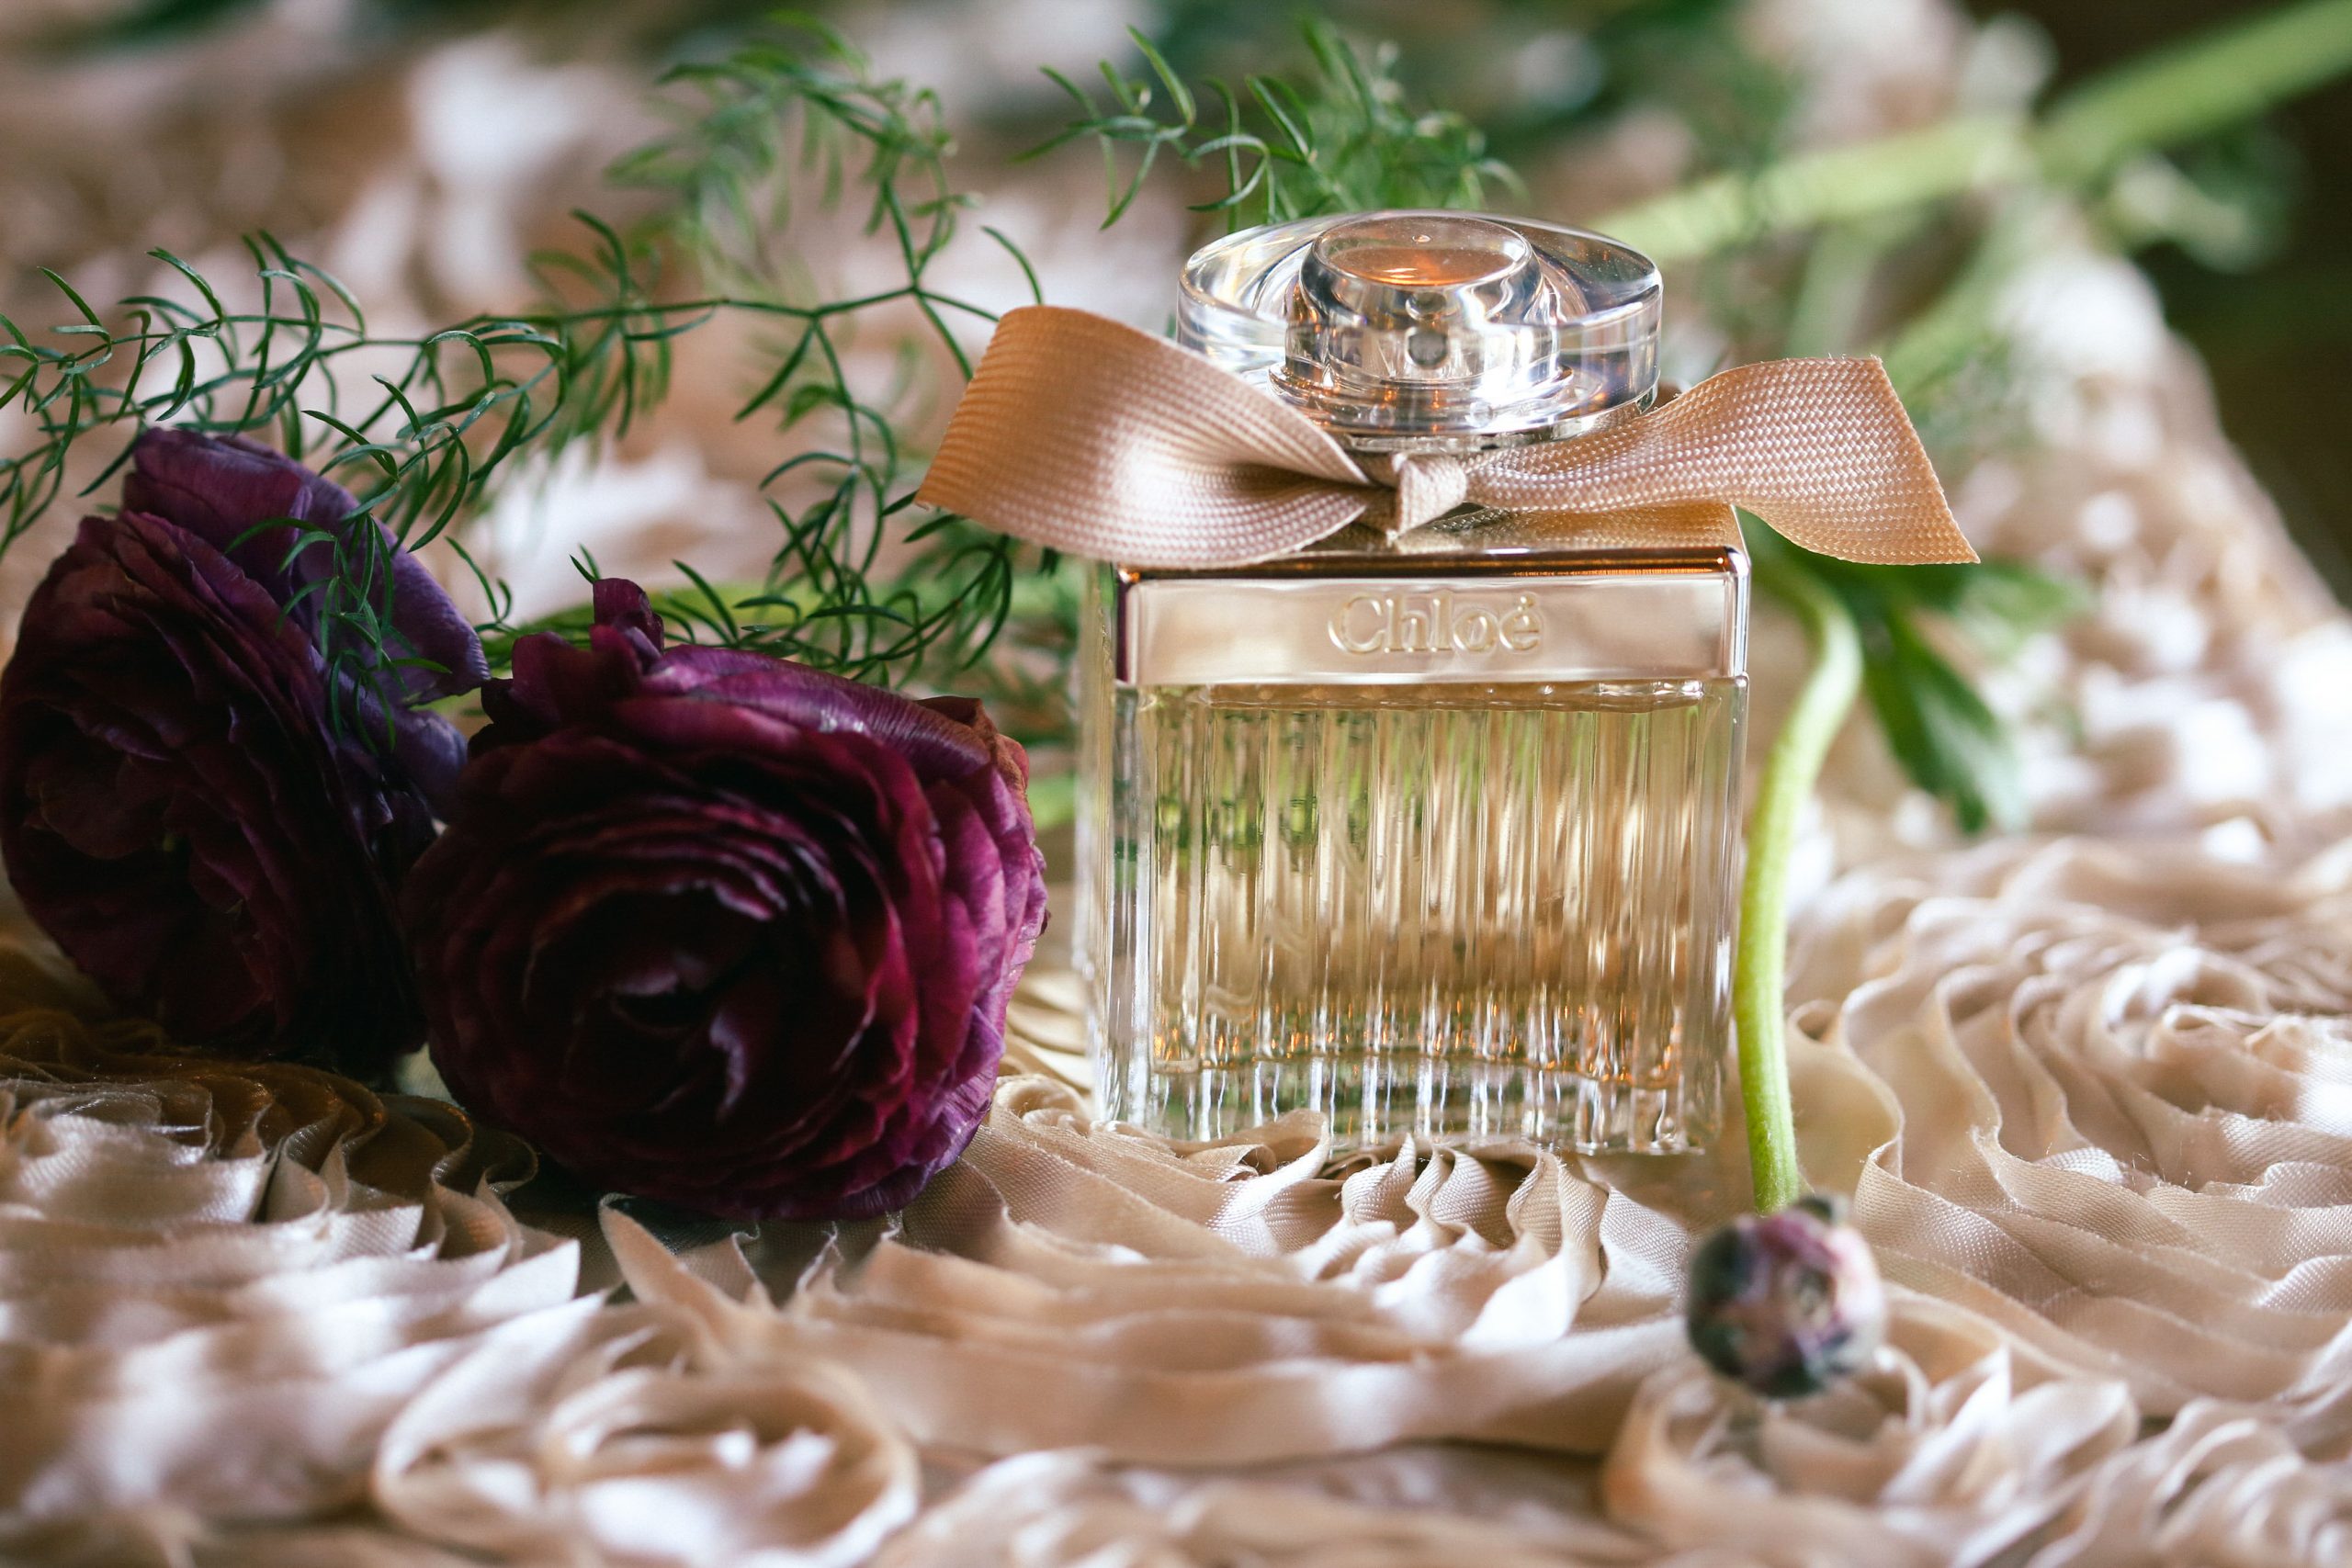 Here's some trendiest wedding inspiration to set the perfect mood for your wedding with these amazing ideas of fragrances!